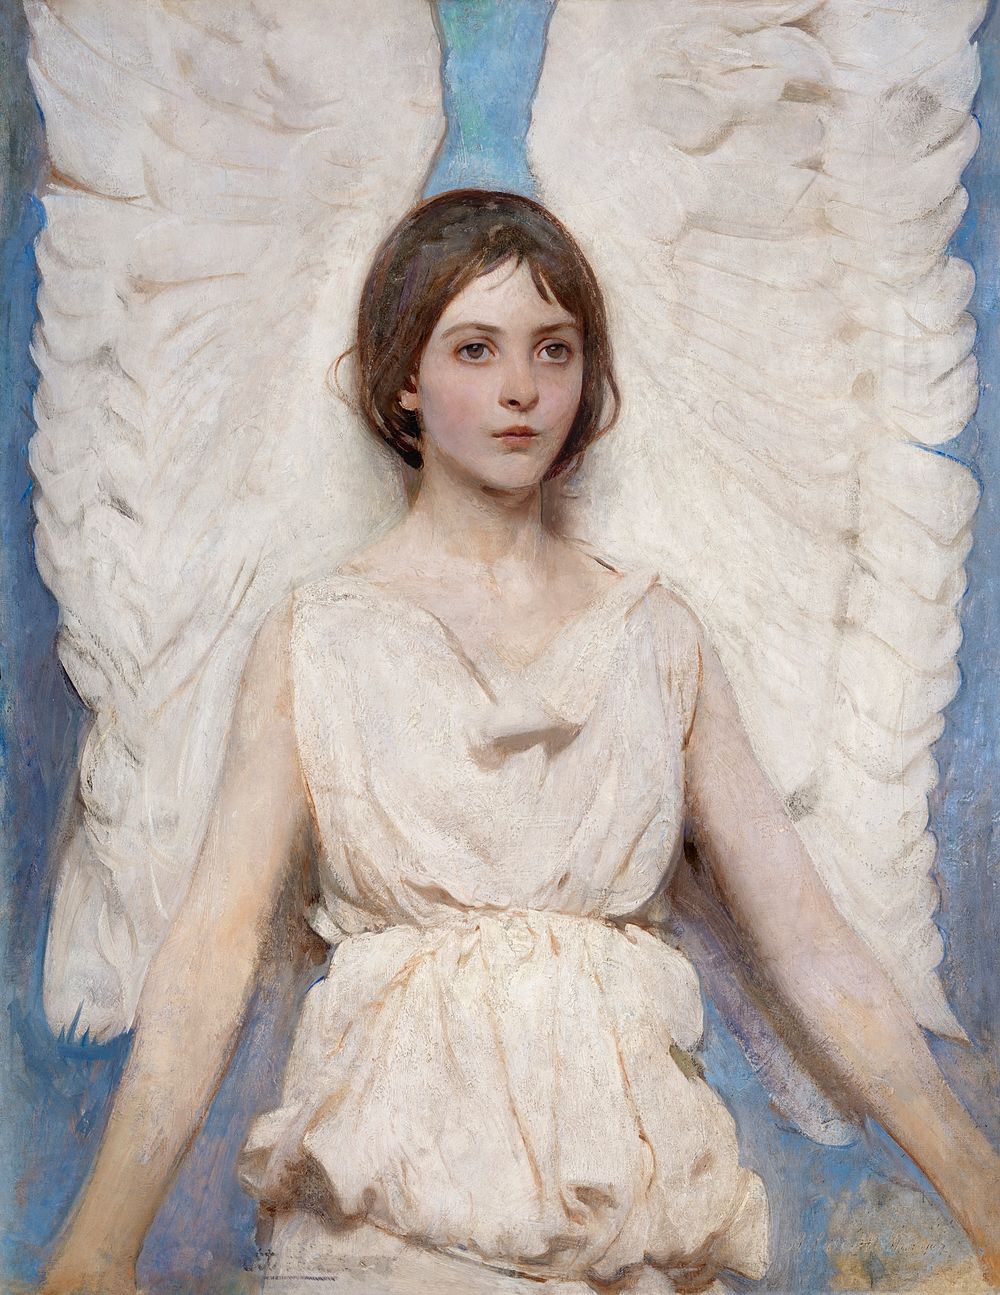 Angel (1887) painting in high resolution by Abbott Handerson Thayer. Original from the Smithsonian Institution. Digitally…